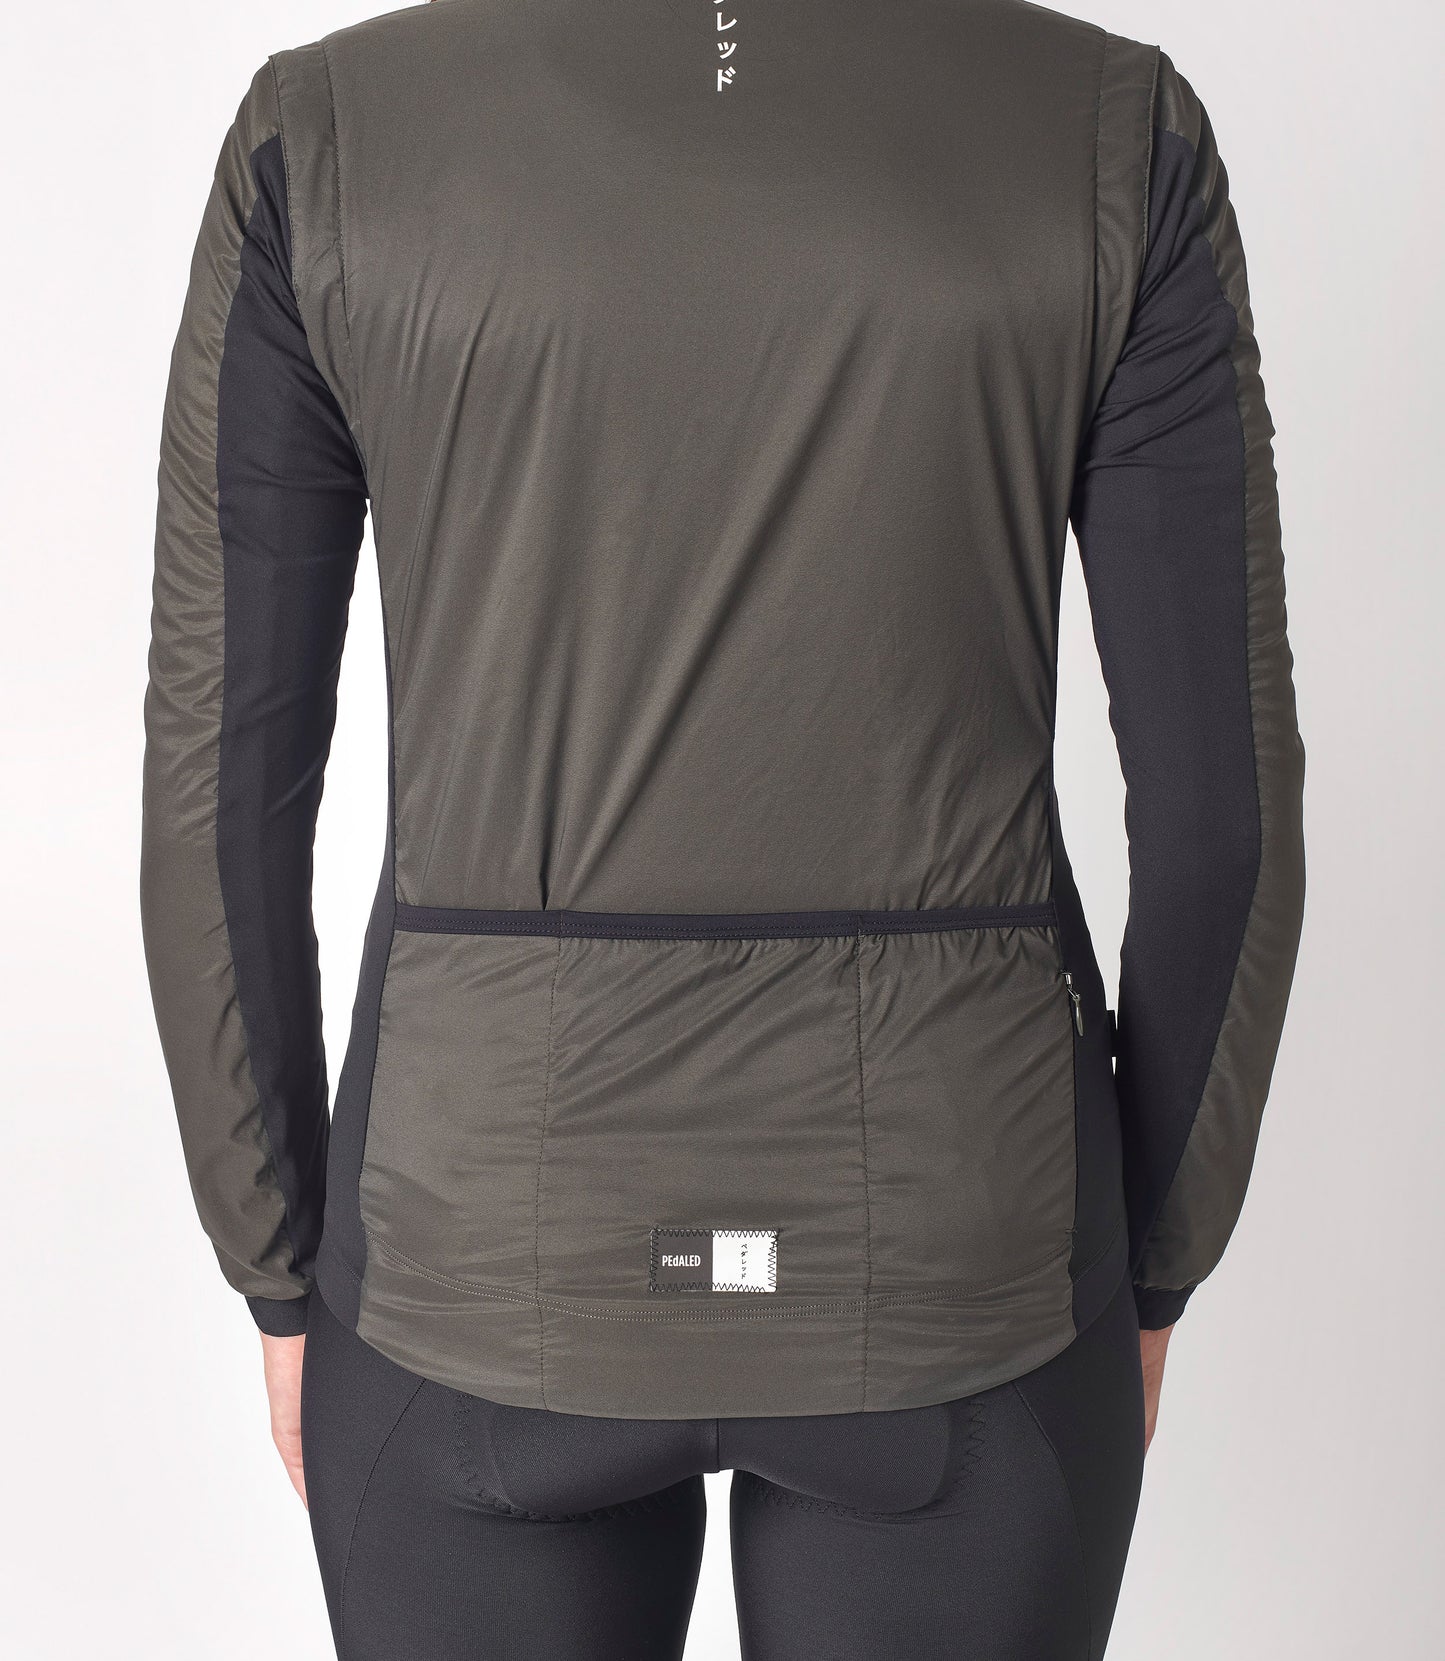 W3WAJEE20PE_8_women cycling jacket alpha grey essential front back pedaled